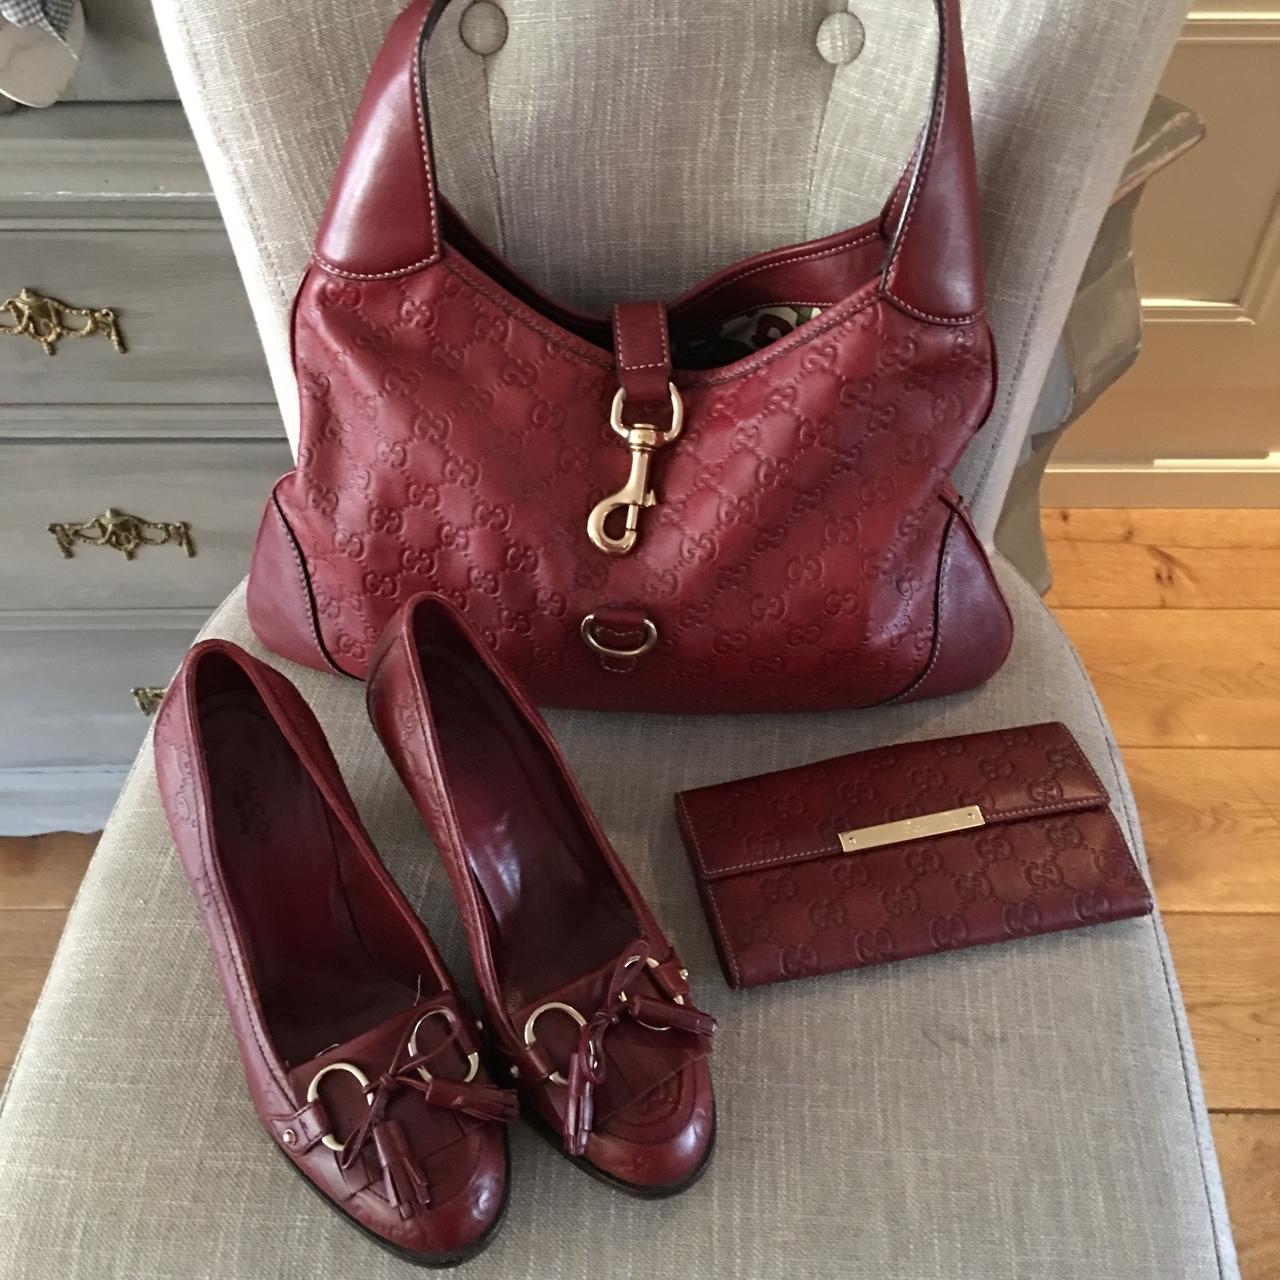 gucci bag and shoes set